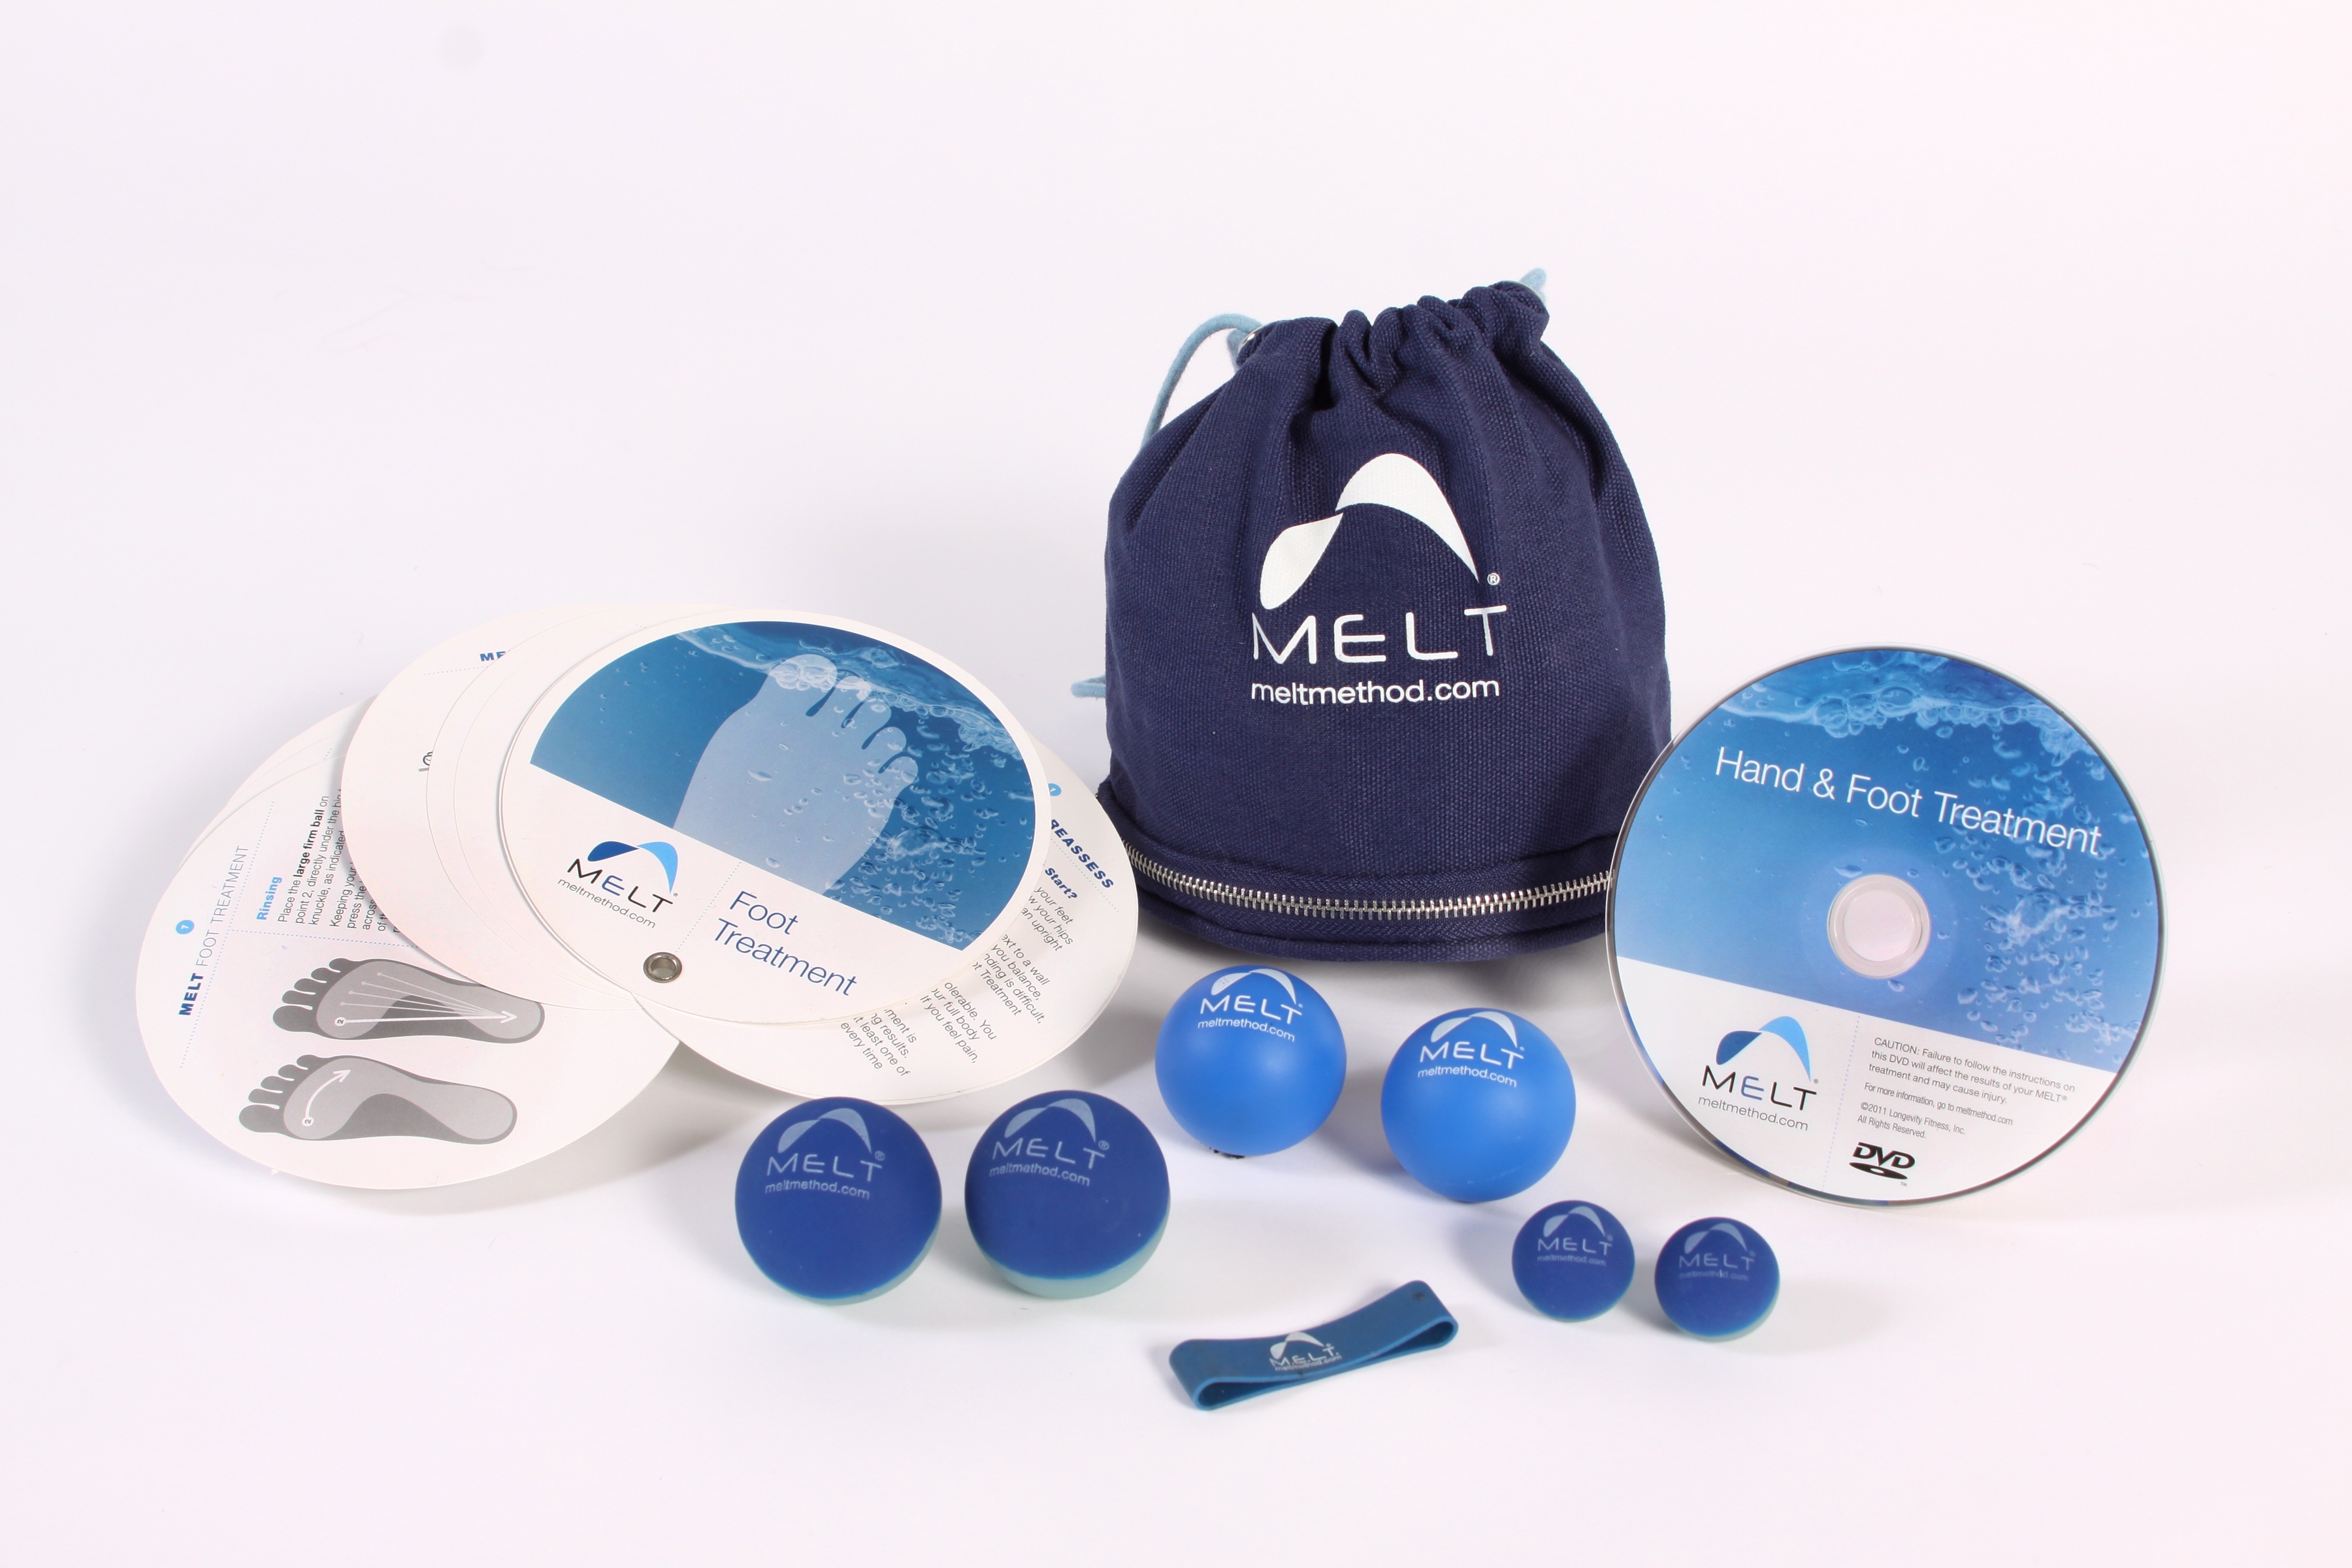 Cupid's Pulse Article: Giveaway: Stop Pain From Ruining Your Date Night With the MELT Method